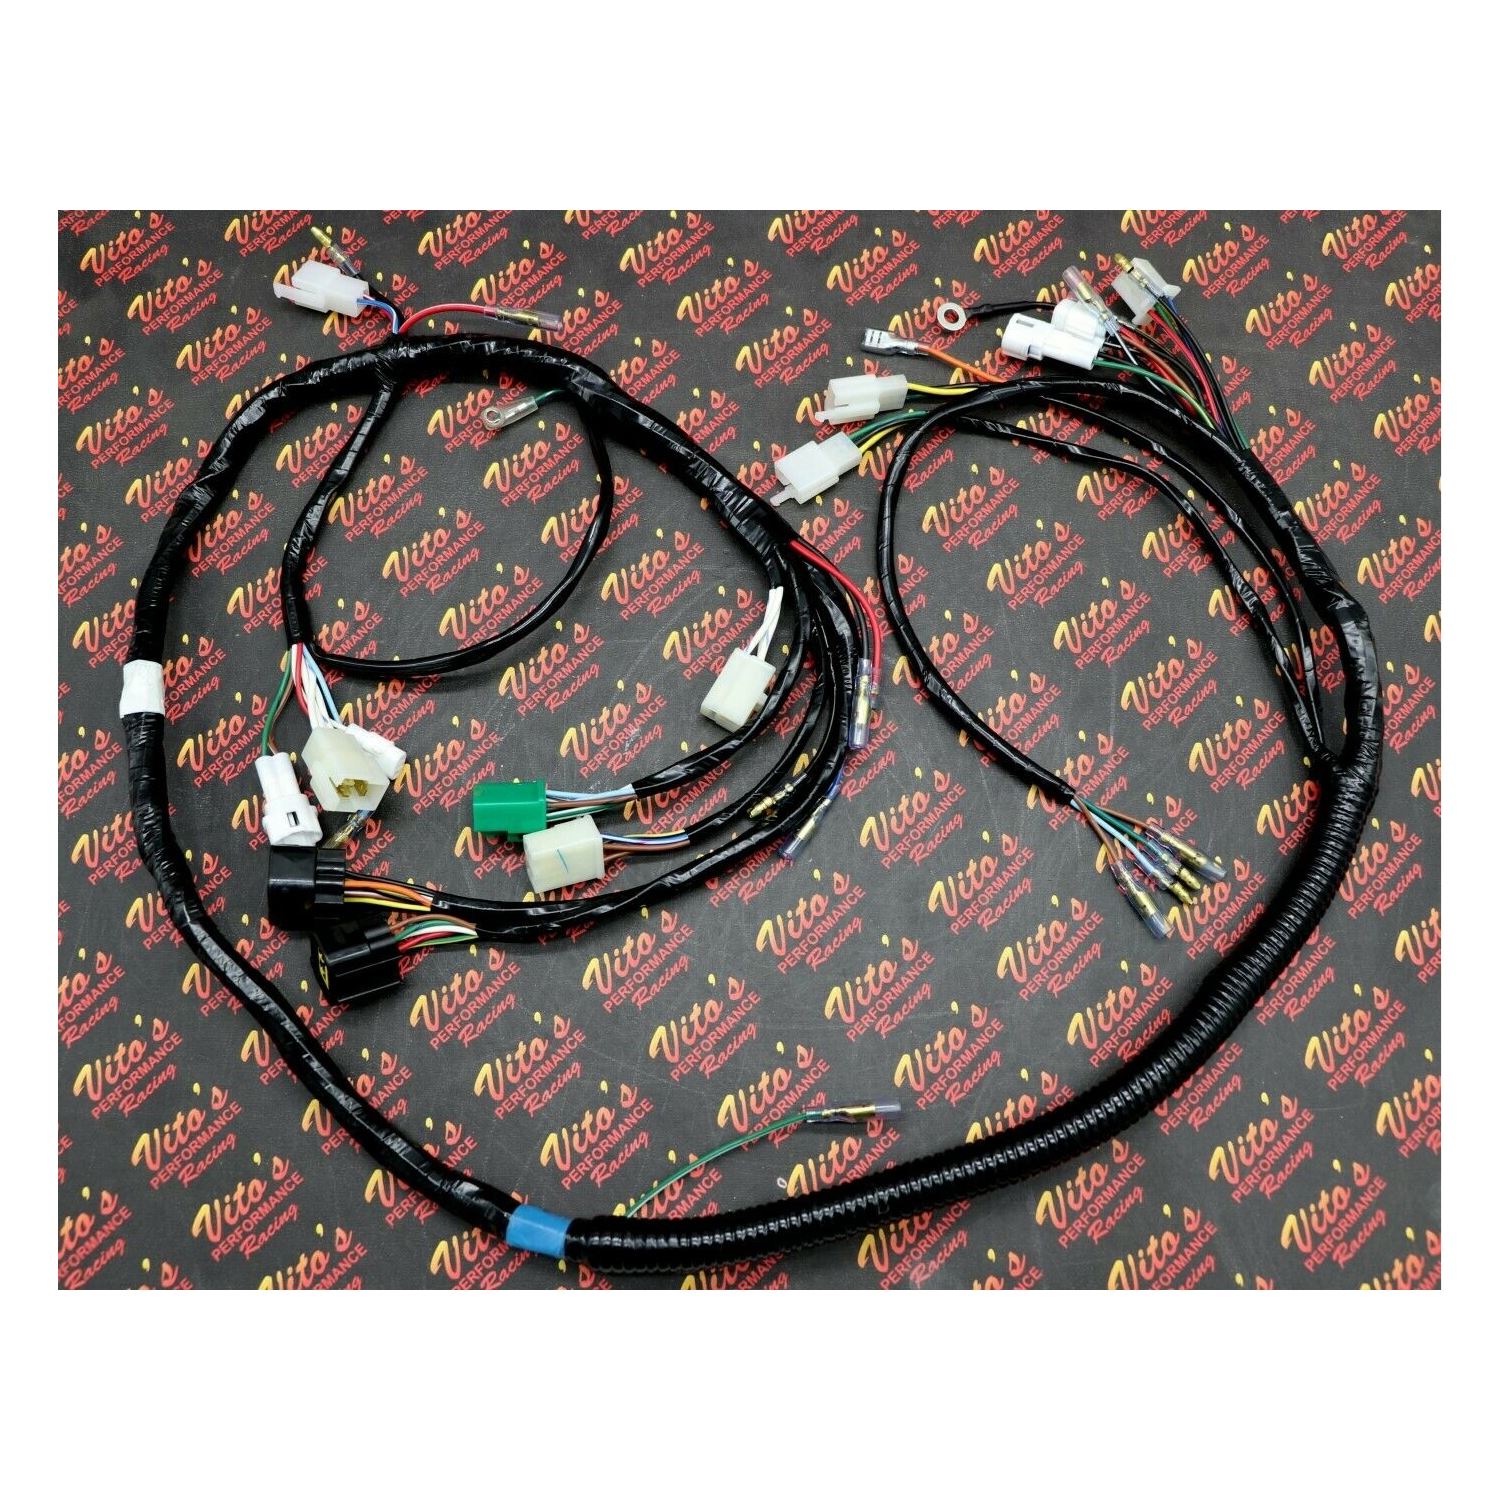 New OEM REPLACEMENT Wiring Harness Loom + Plugs 19